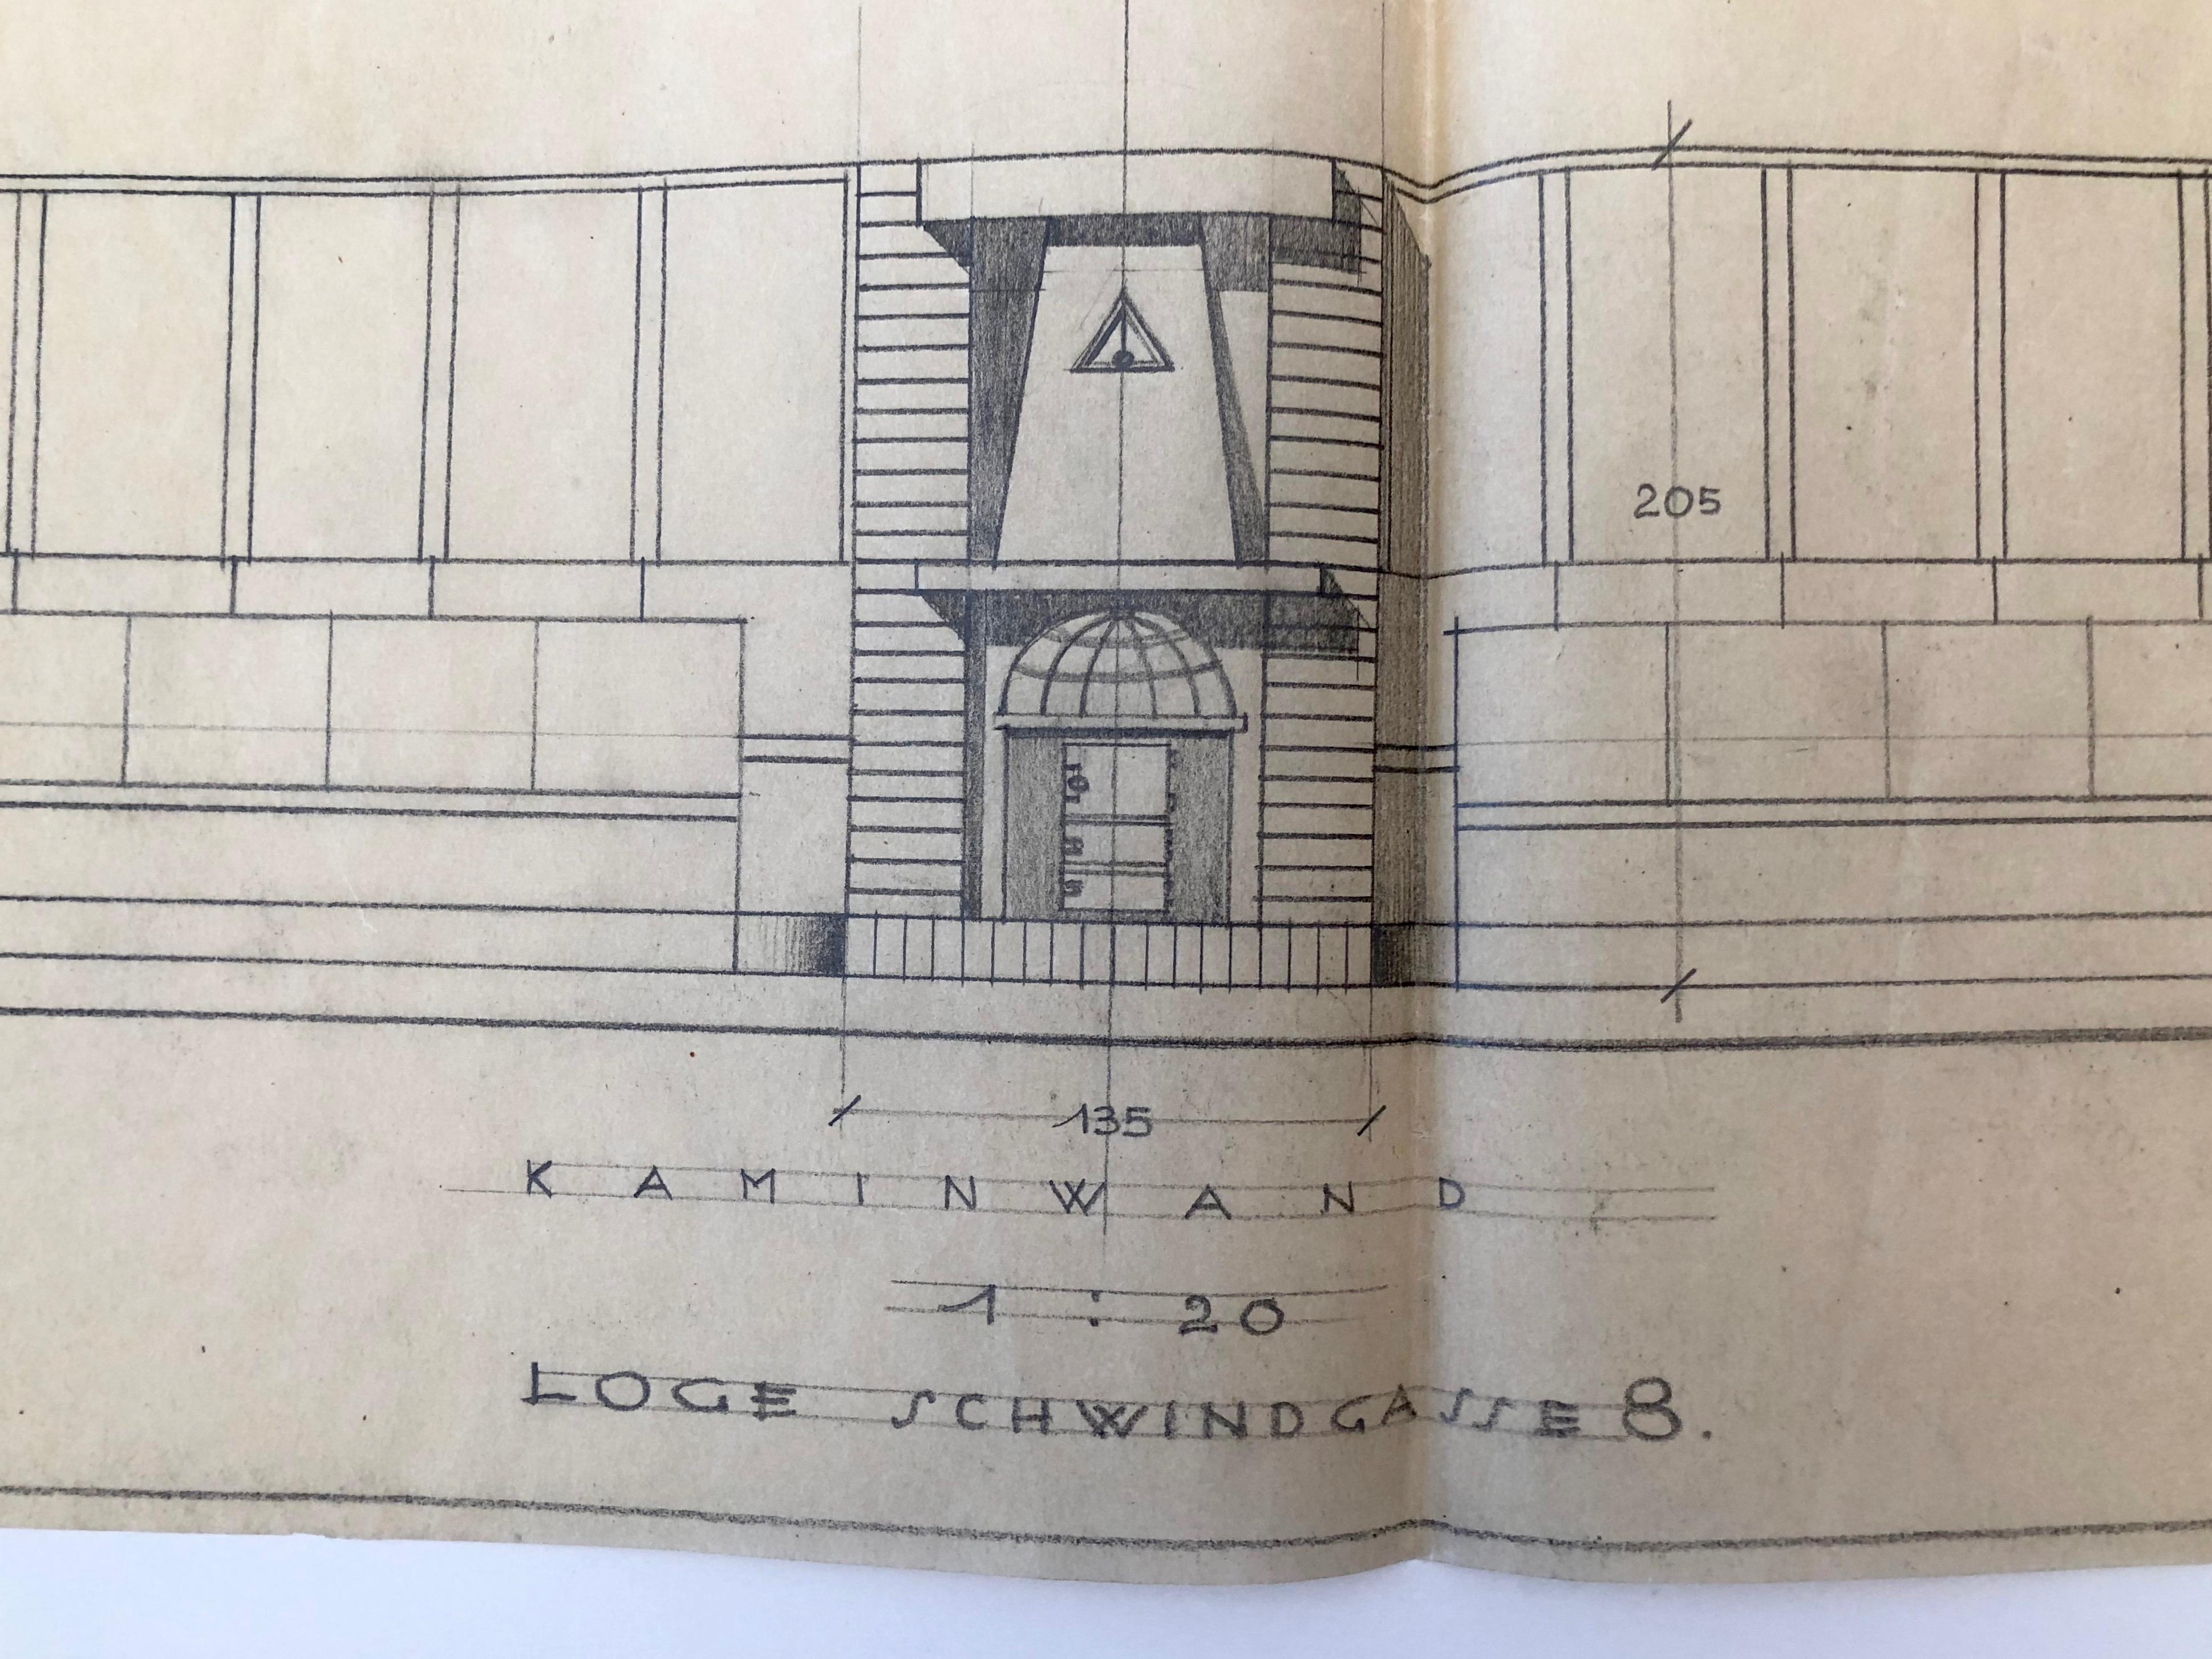 Set of Working Drawings, 1930, for a Free Masons Lodge, Schwind Gasse, Vienna For Sale 11